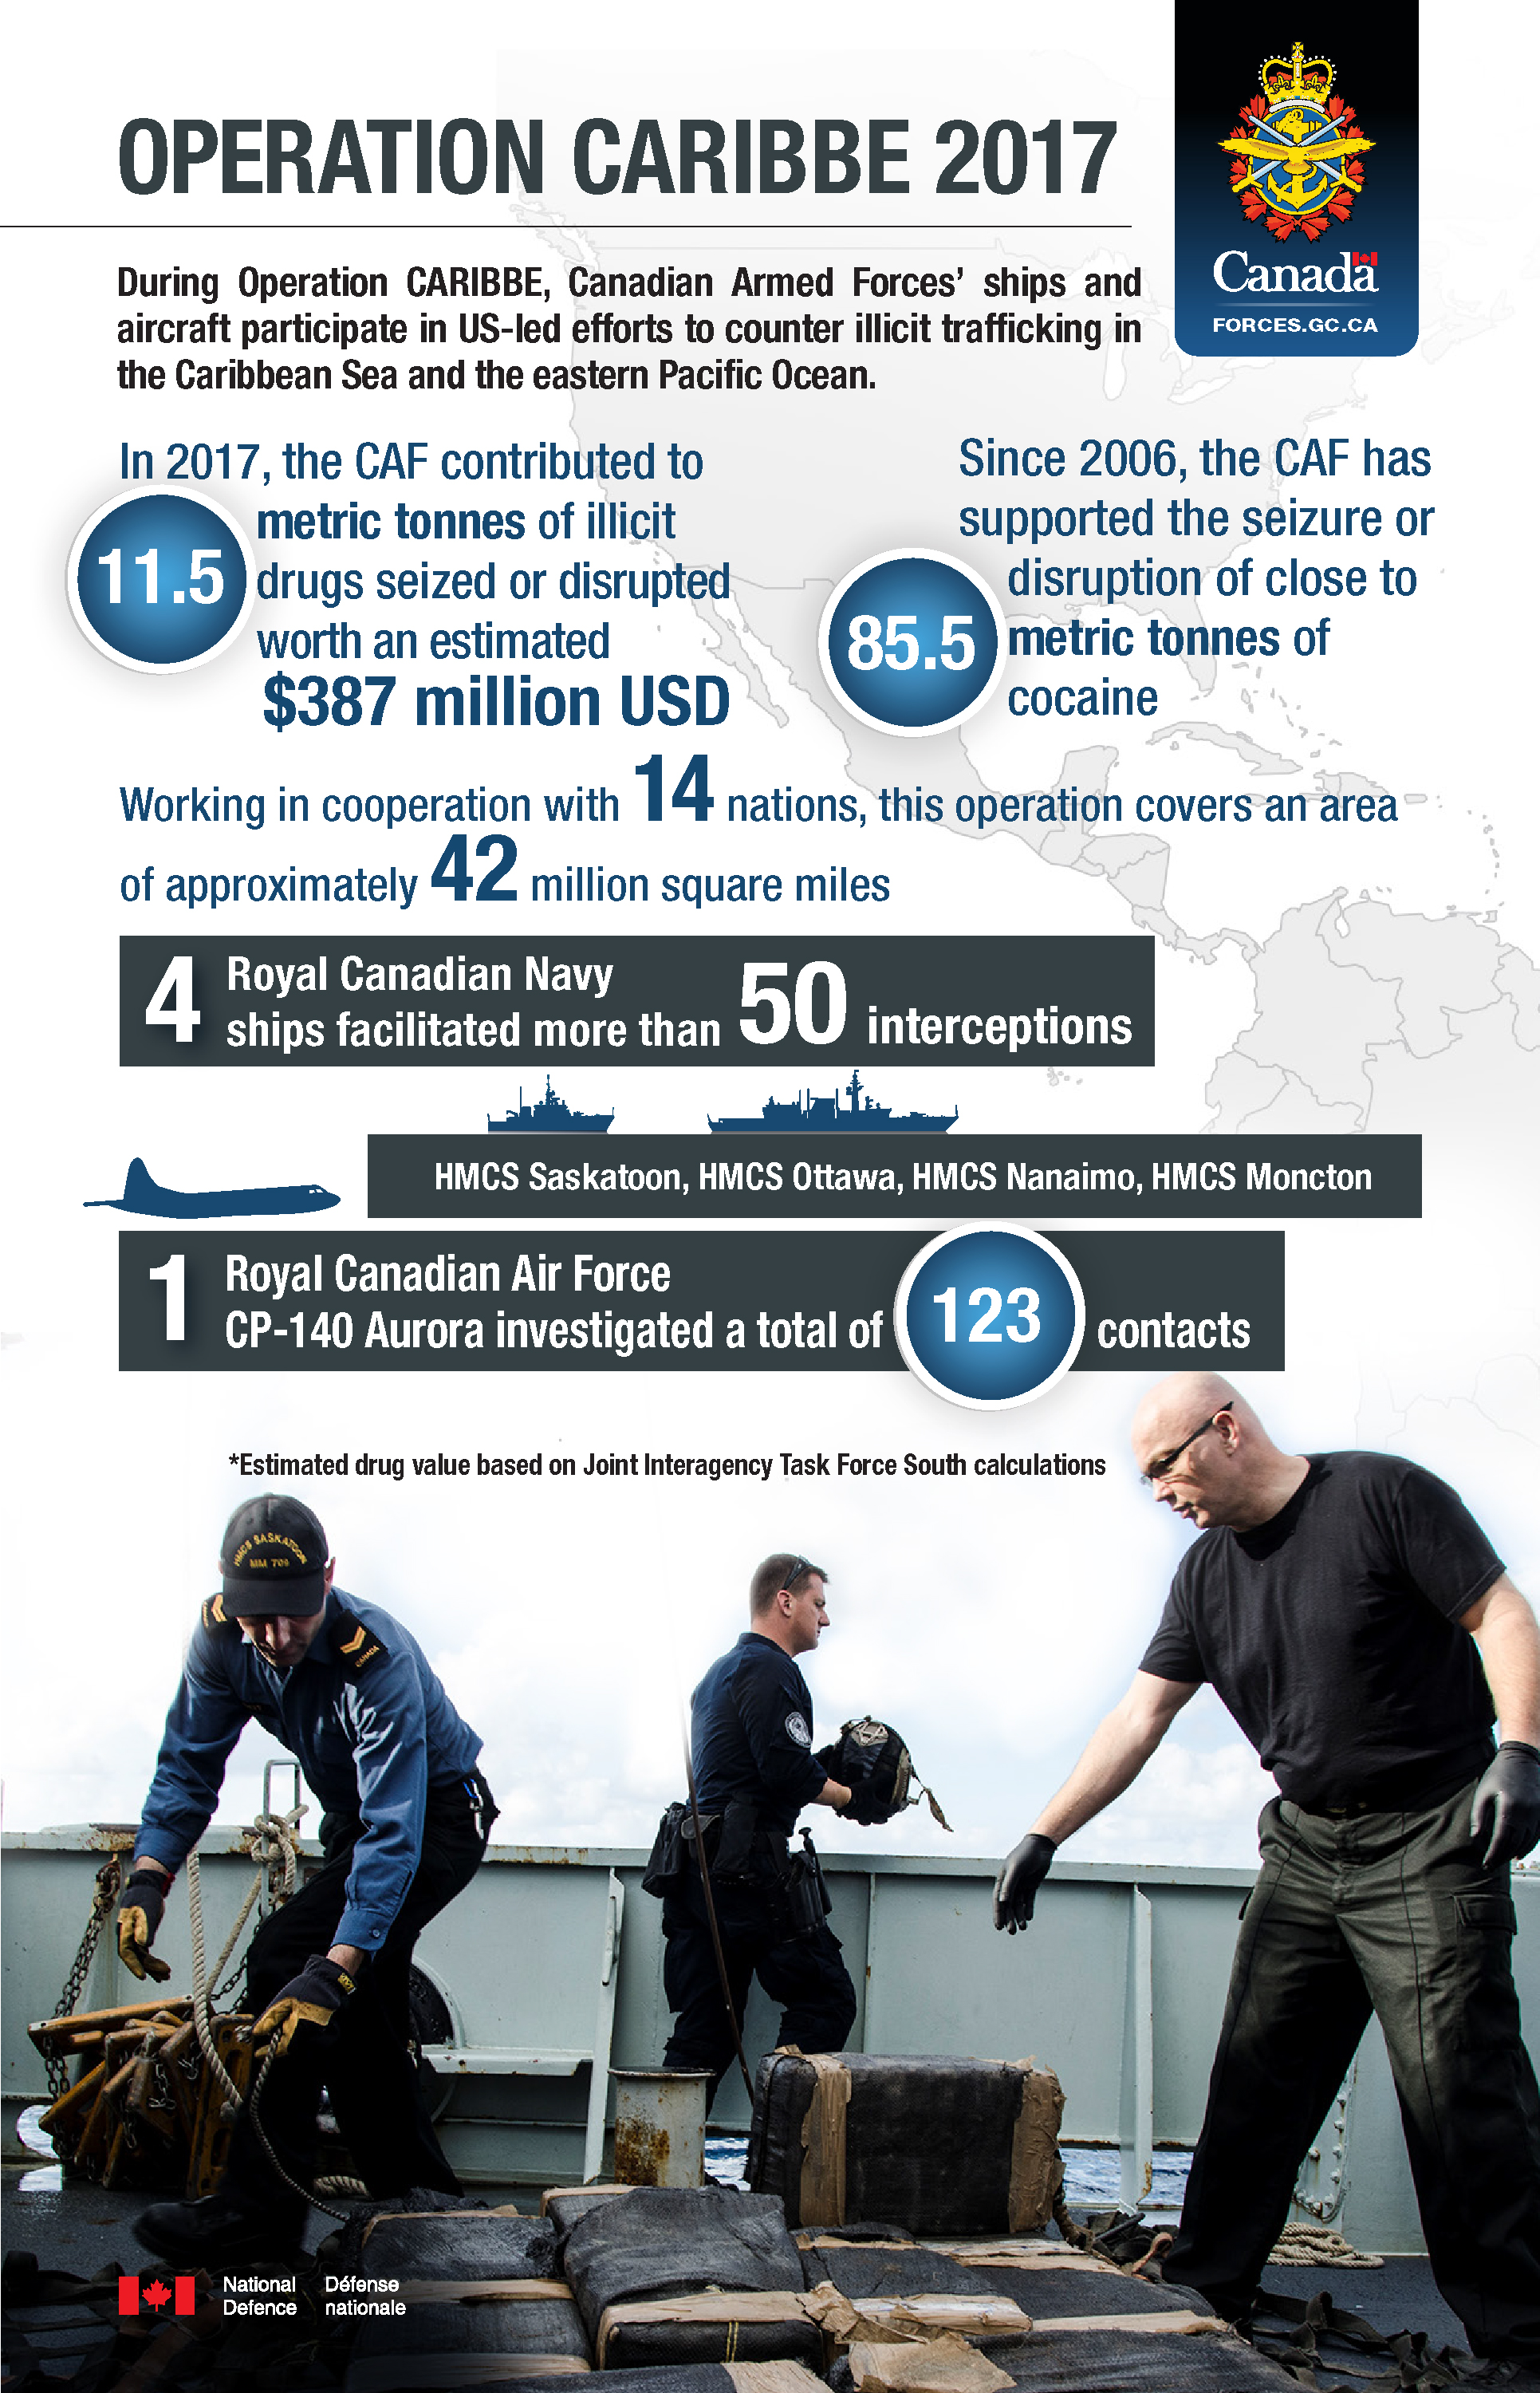 Infographic with a white background and a map of the Caribbean. Title: Operation CARIBBE 2017. Text underneath the title: During Operation CARIBBE, Canadian Armed Forces’ ships and aircraft participate in US-led efforts to counter illicit trafficking in the Caribbean Sea and the eastern Pacific Ocean. To the right, there is an emblem with text: Canada. Forces.gc.ca. Below that there is text: In 2017, the CAF contributed to 11.5 metric tonnes of illicit drugs seized or disrupted worth an estimated $387 million USD. Since 2006, the CAF has supported the seizure or disruption of close to 85.5 metric tonnes of cocaine. Working in cooperation with 14 nations, this operation covers an area of approximately 42 million square miles. 4 Royal Canadian Navy ships facilitated more than 50 interceptions. HMCS Saskatoon, HMCS Ottawa, HMCS Nanaimo, HMCS Moncton. 1 Royal Canadian Air Force CP-140 Aurora investigated a total of 123 contacts. Estimated drug value based on Joint Interagency Task Force South calculations. At the bottom of the infographic there is an image of members of the Royal Canadian Navy and of the United States Coast Guard handling packages of cocaine from a suspect vessel. In the bottom right corner there is a Canadian flag and text: National Defence. Défense nationale.